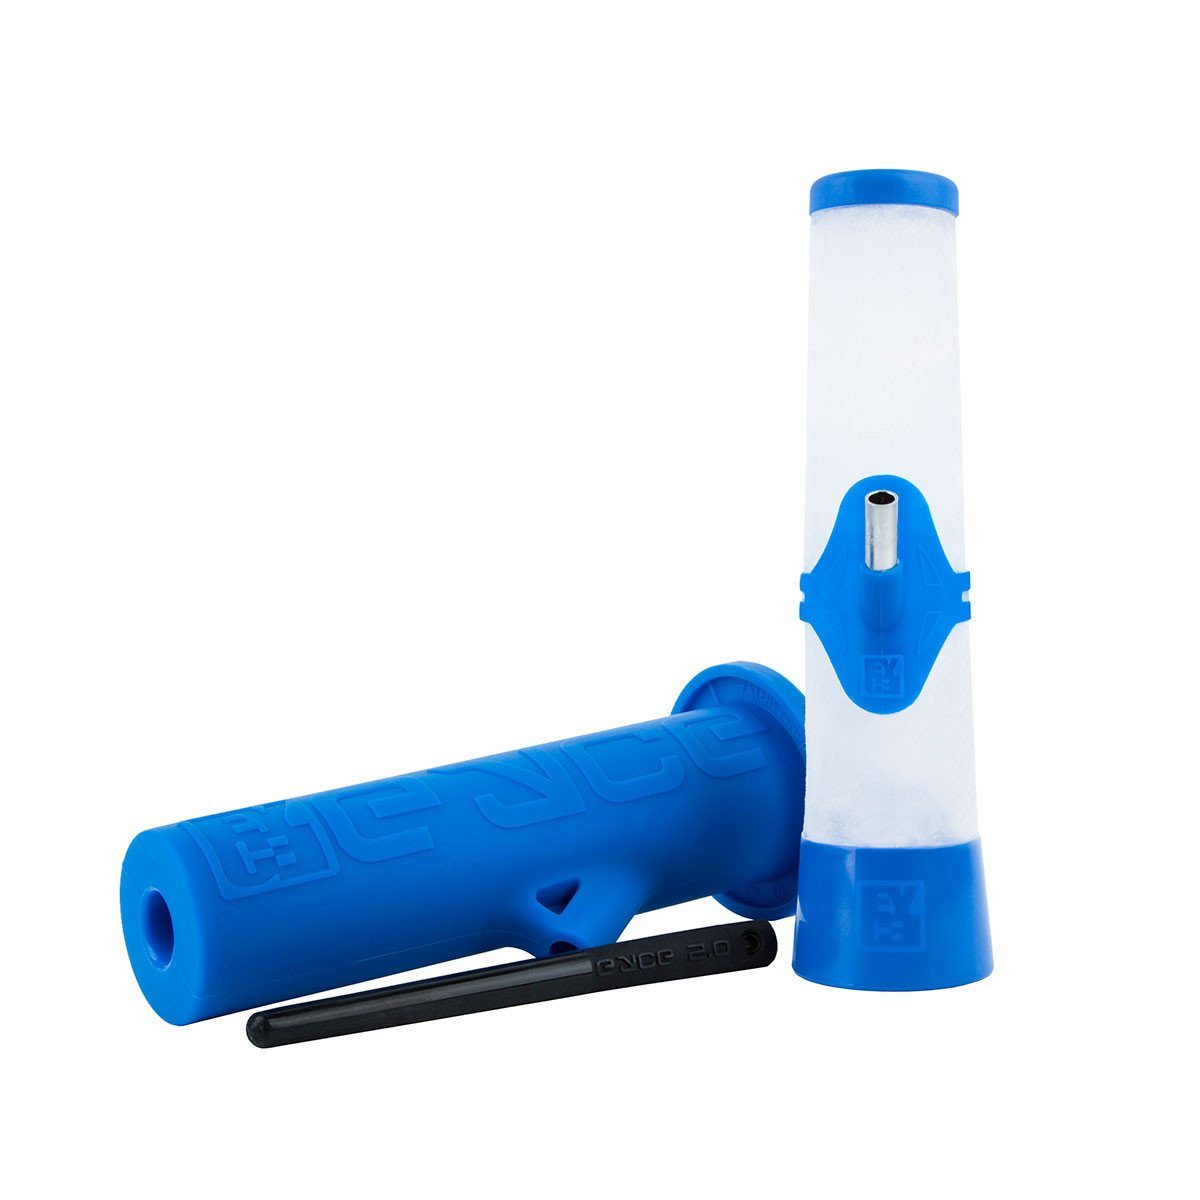 EYCE 2.0 Silicone Bong in Blue, 12.75" Portable Design for Dry Herbs, Side View with Tool